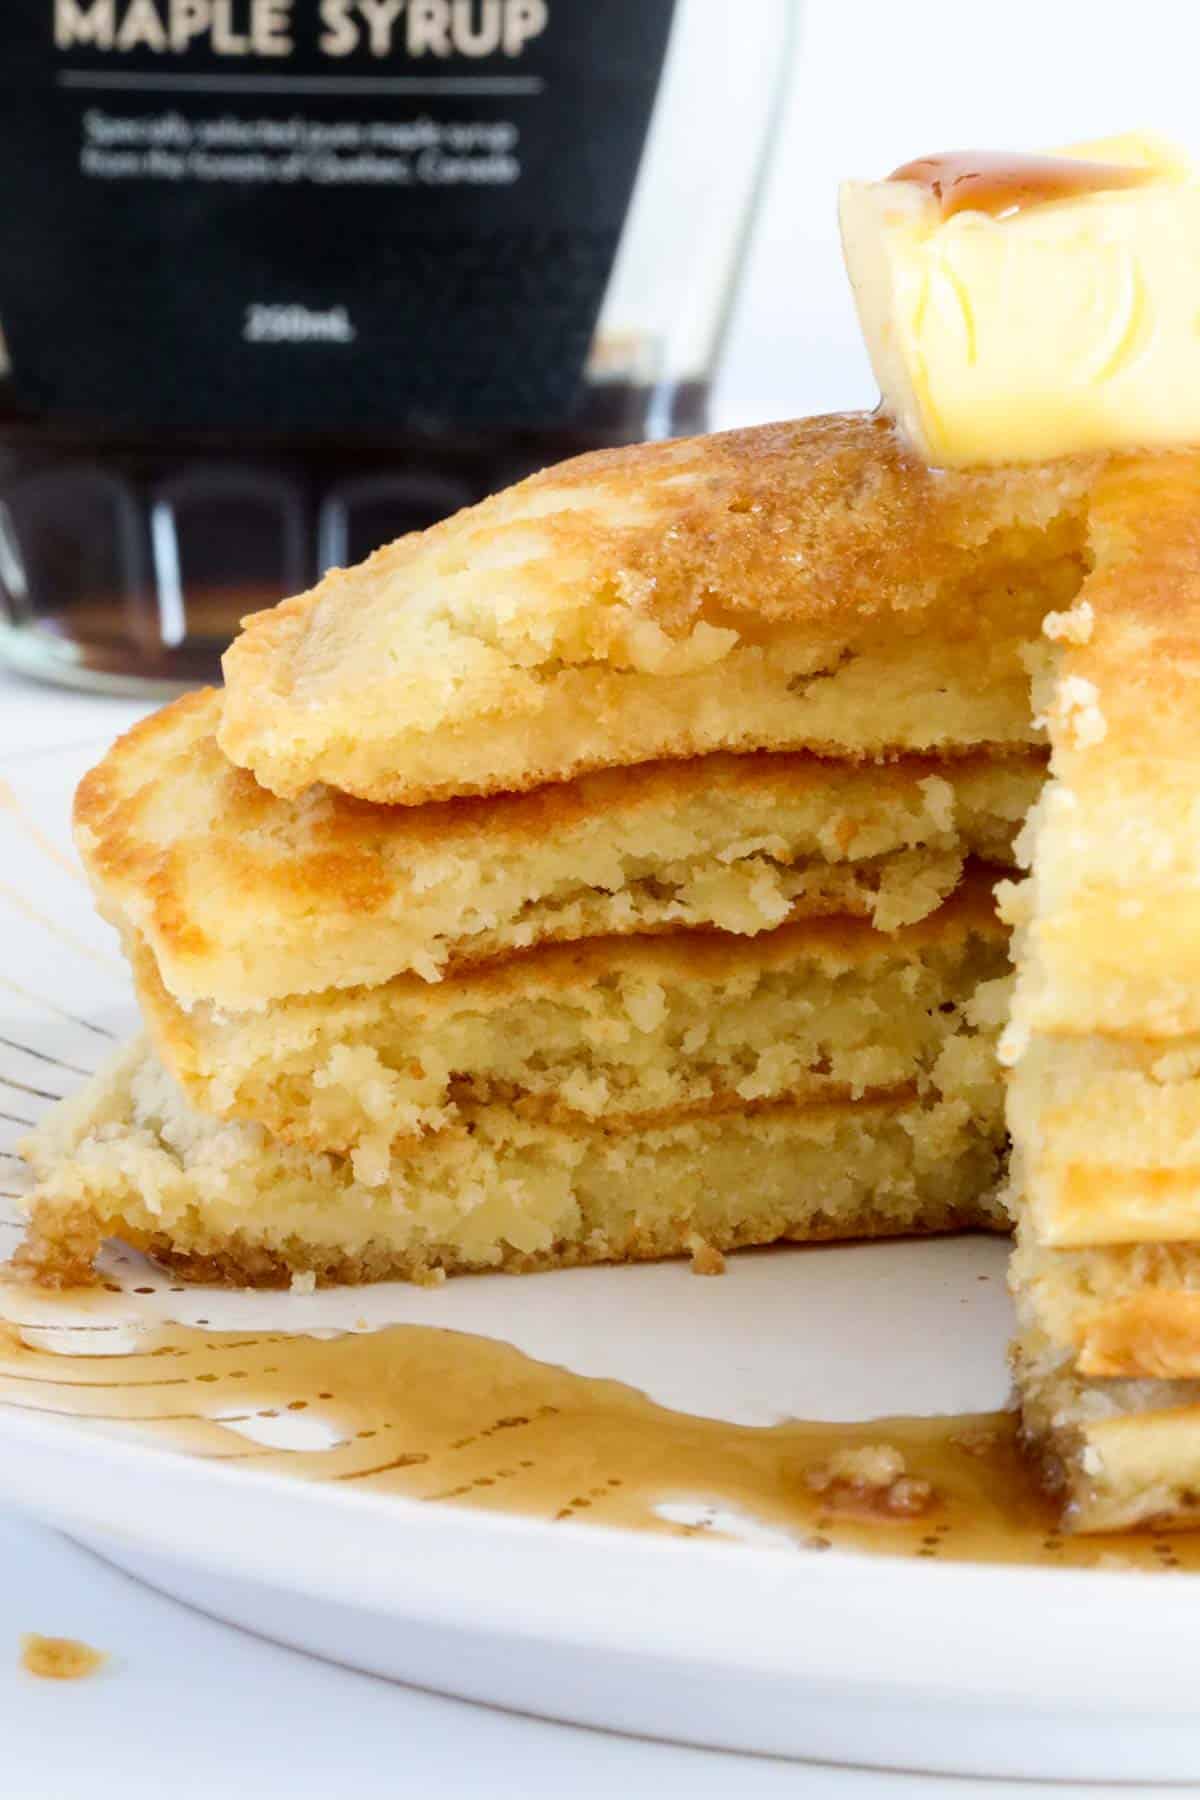 A stack of half-eaten fluffy pancakes with maple syrup and butter.